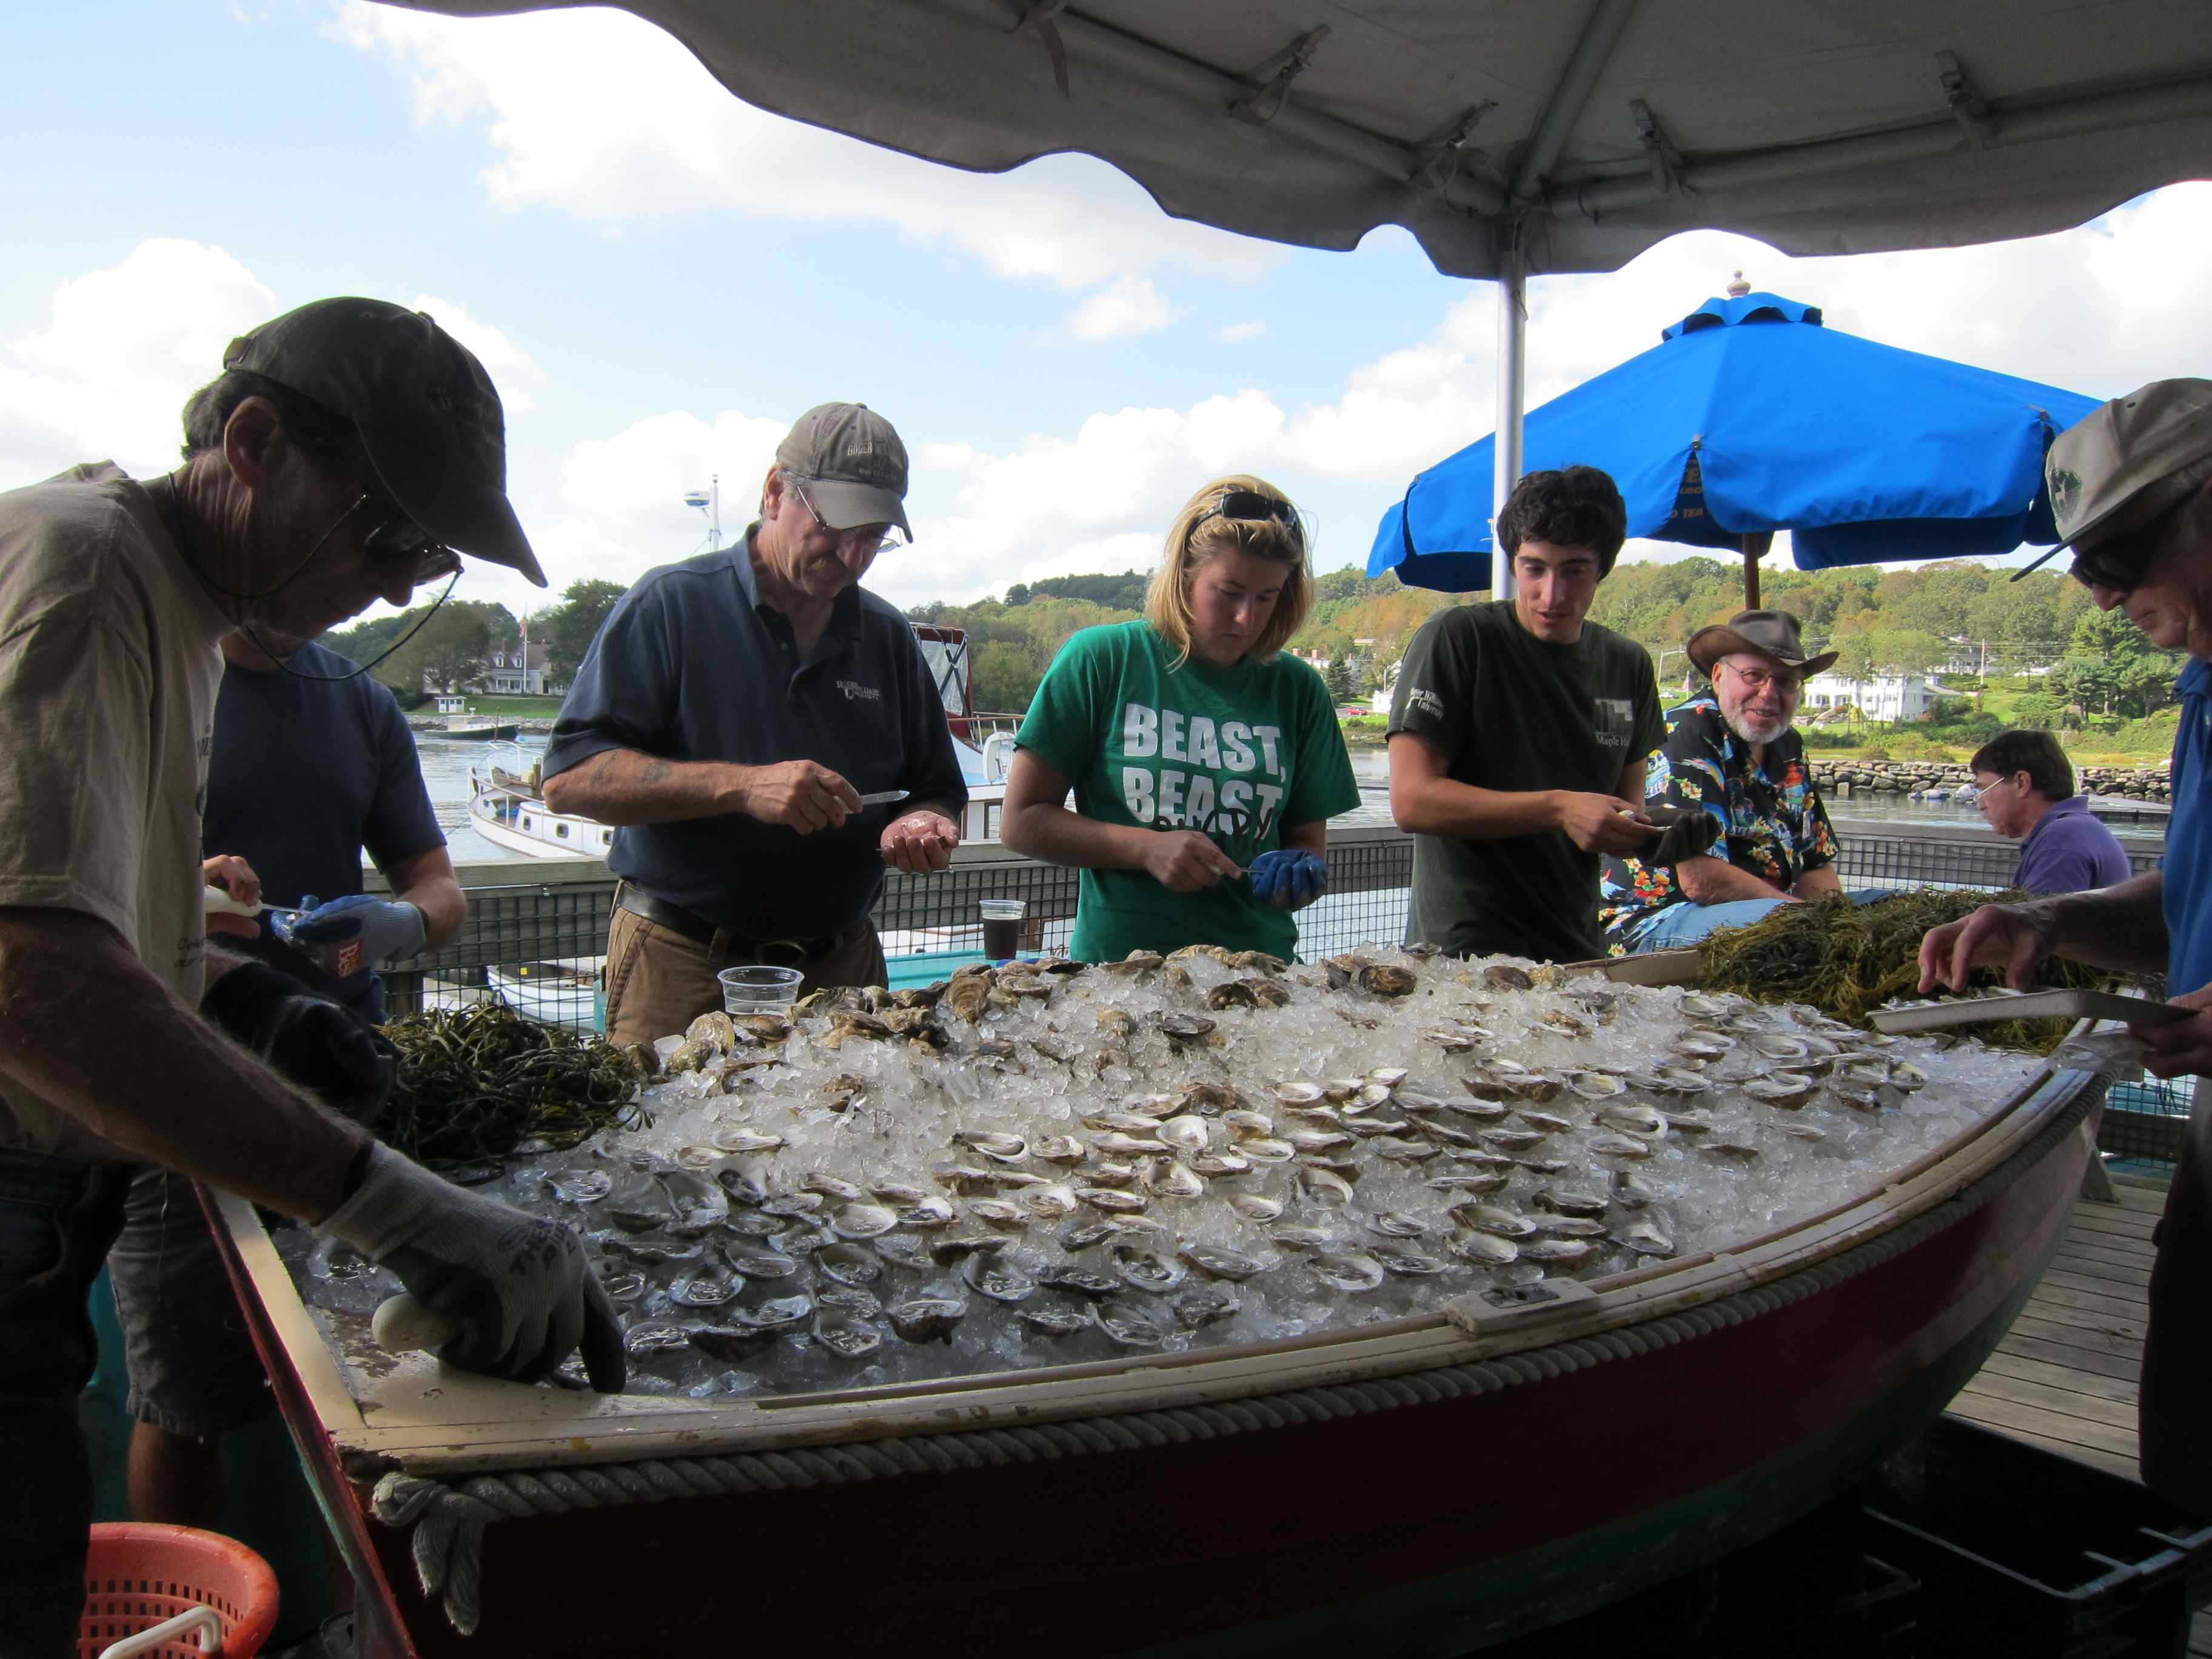 Four shuckers placing oysters on an ice-filled display boat at the festival